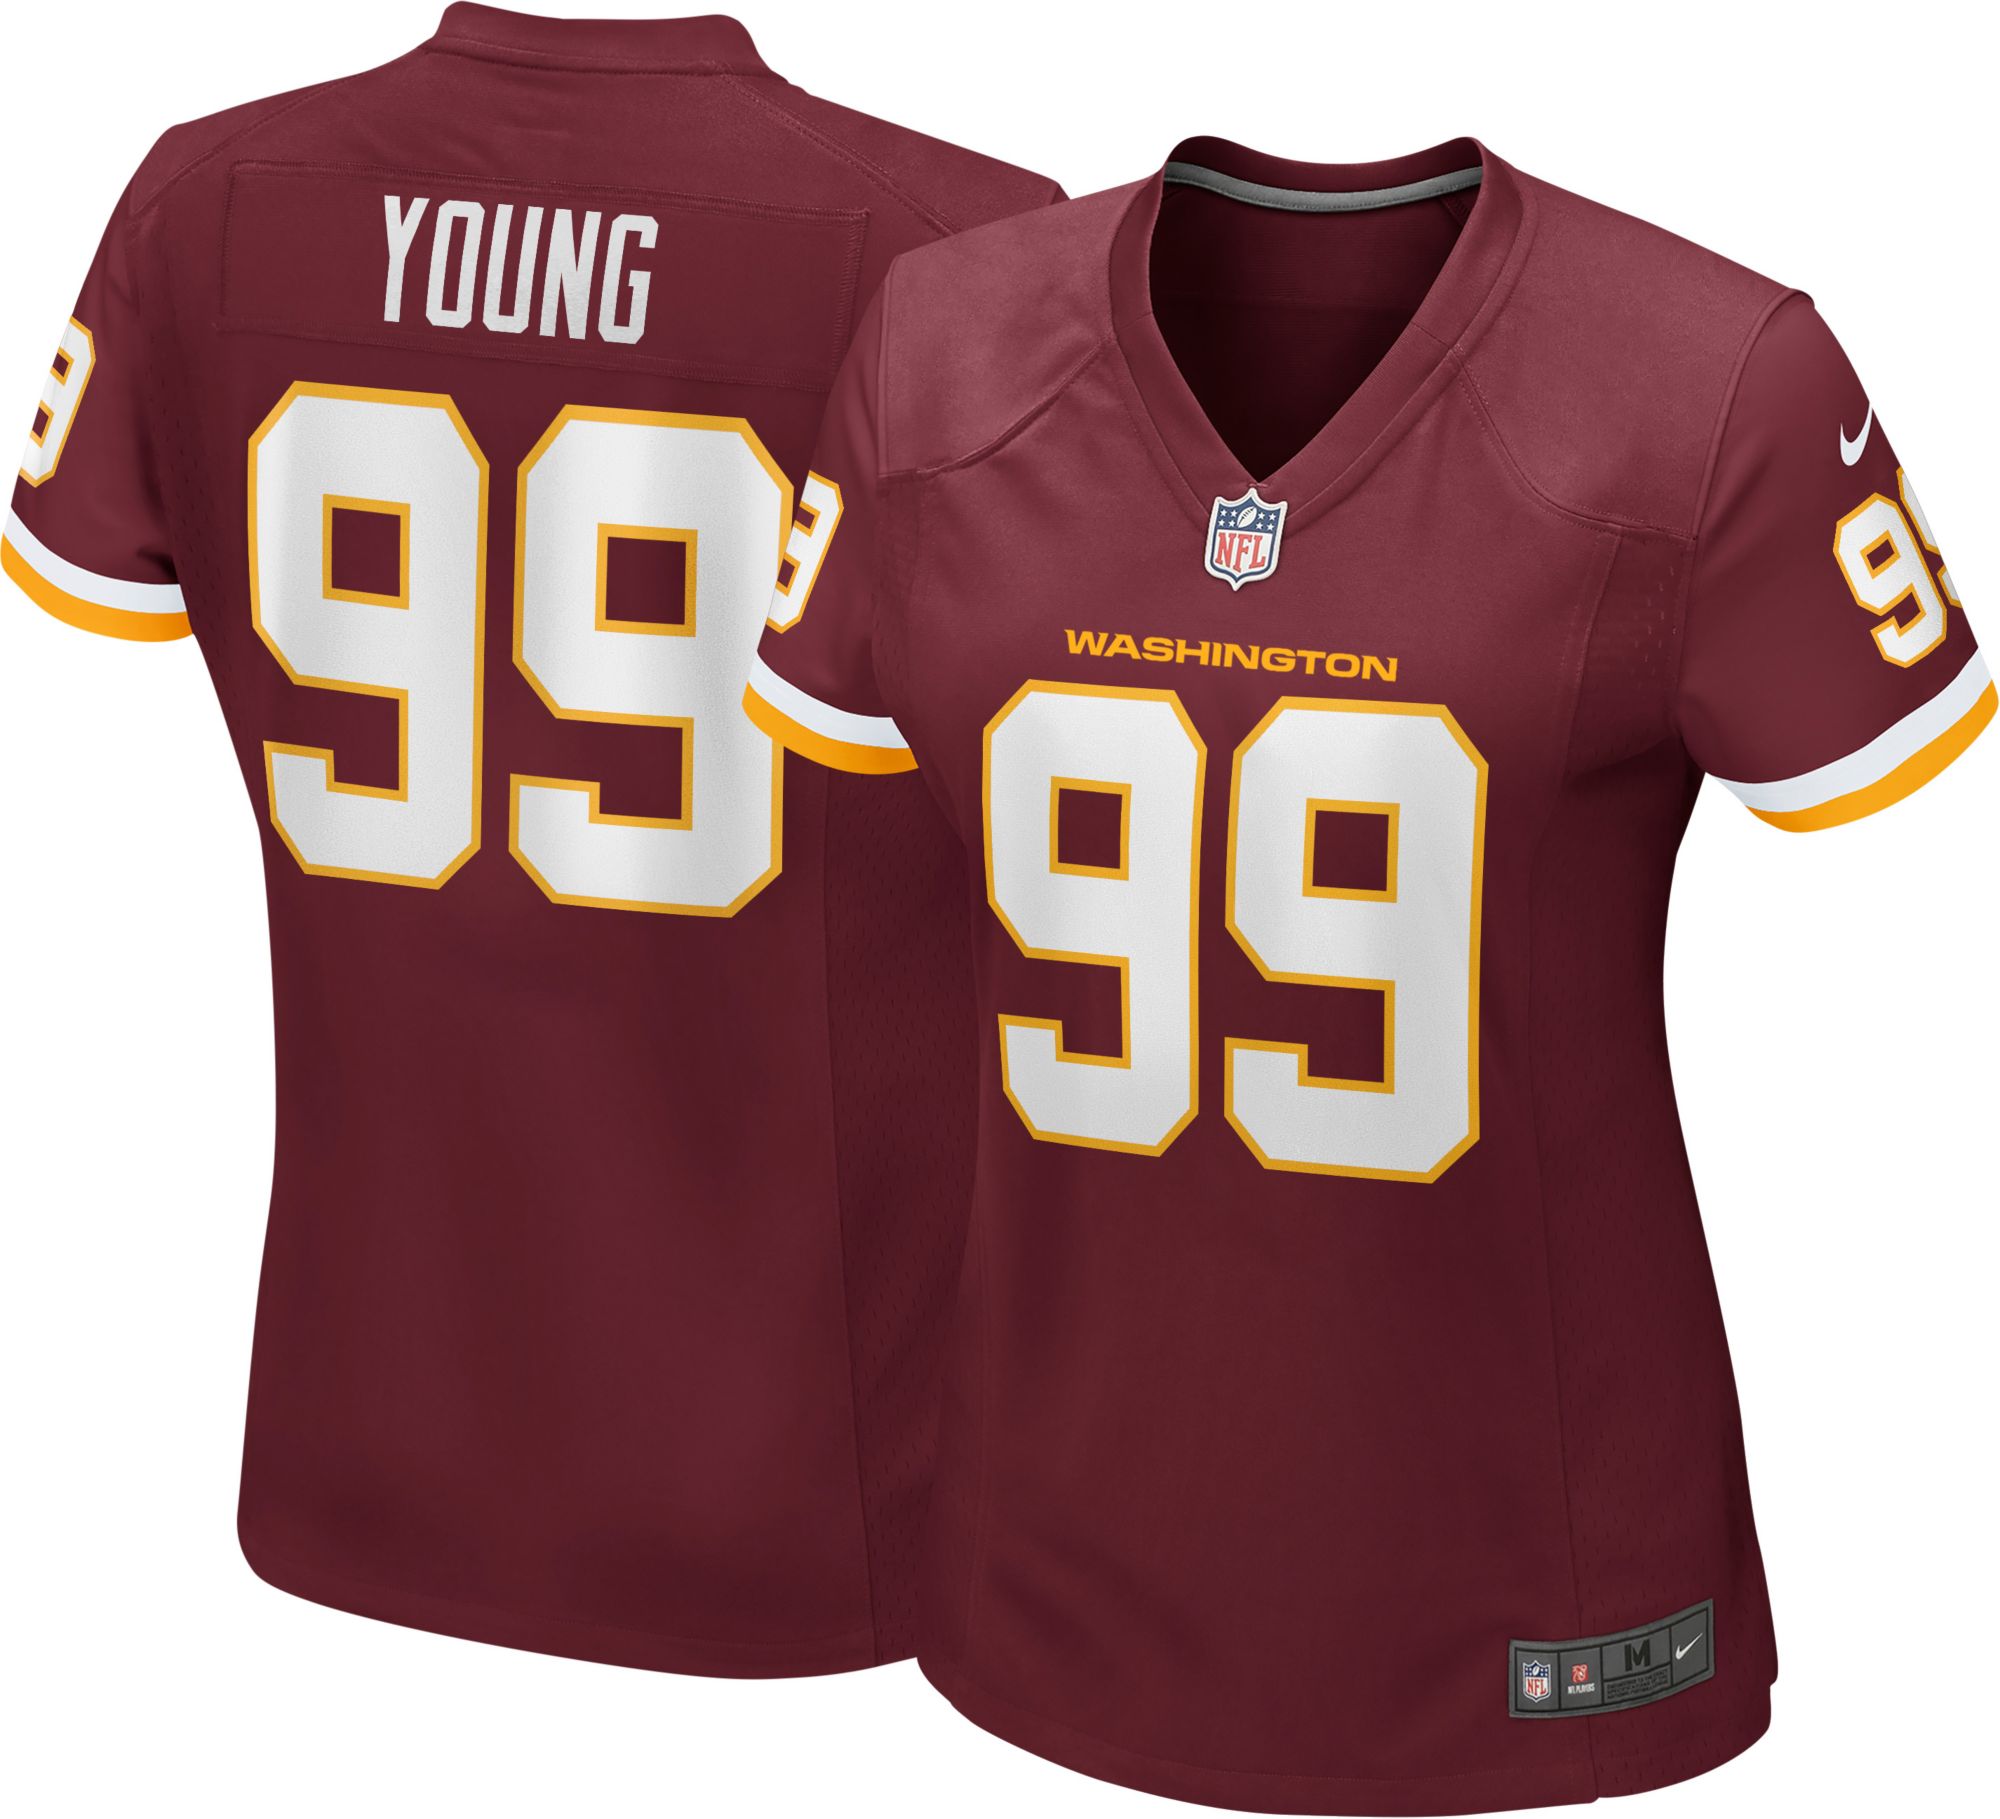 chase young jersey